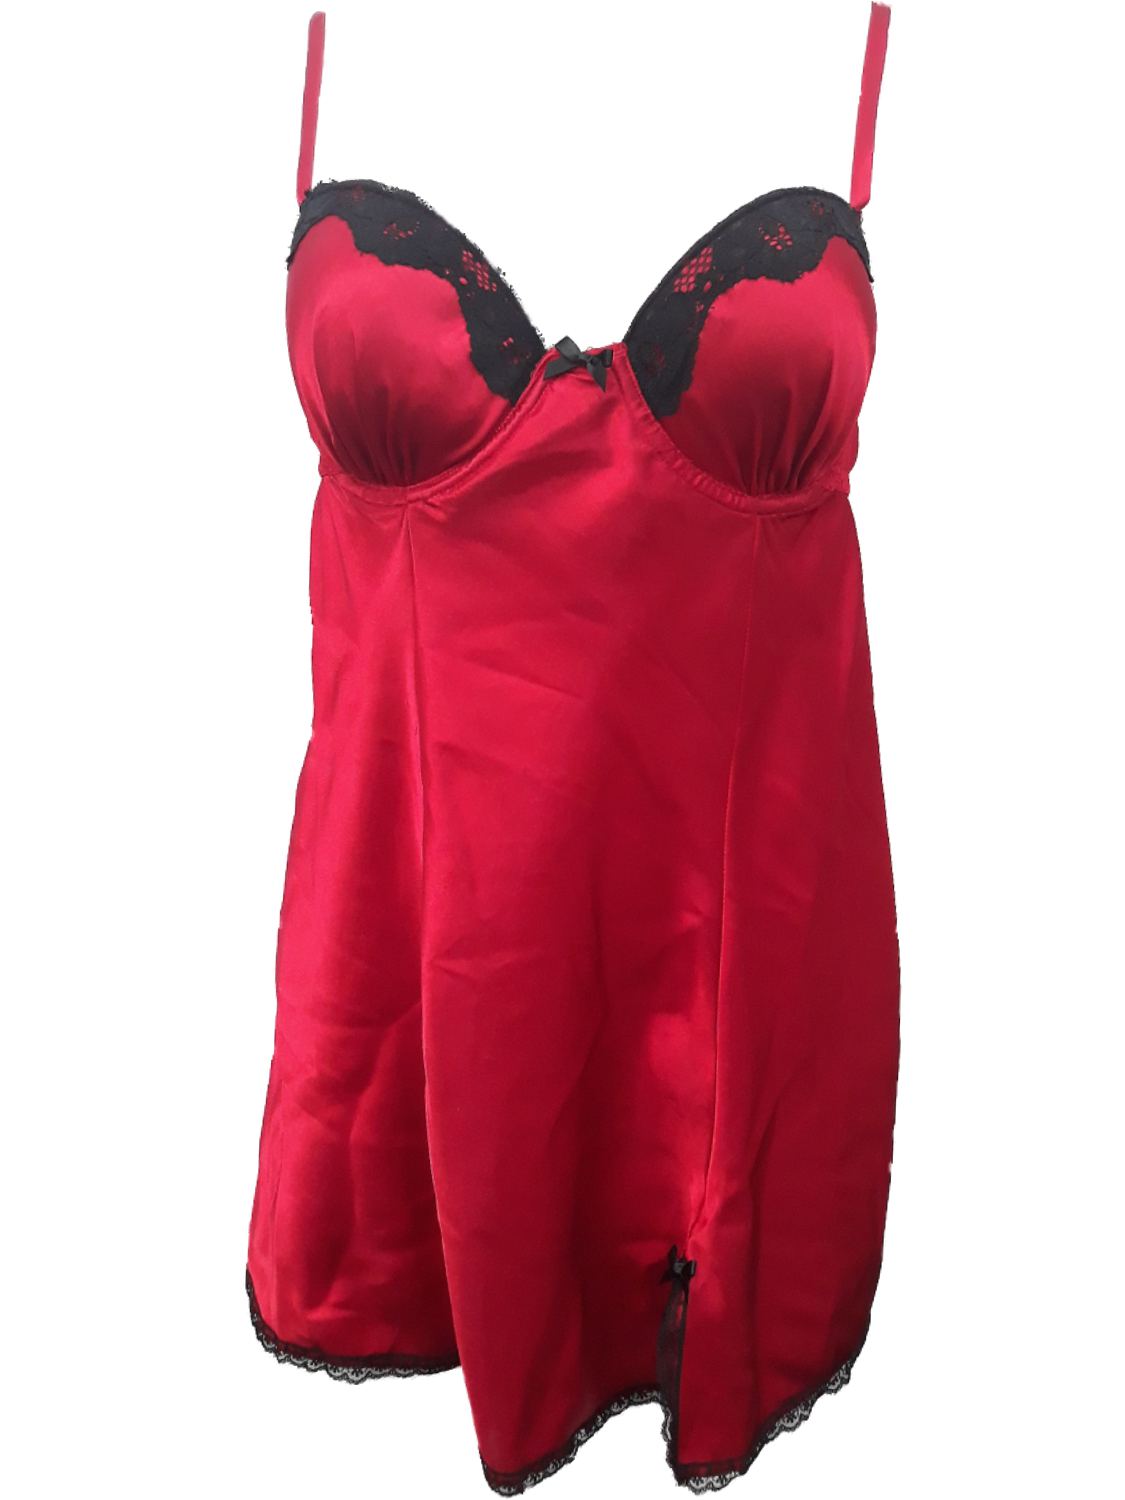 GEORGE Women Red Silky Lace Trim Babydoll Nightie Nightgown Lingerie ...